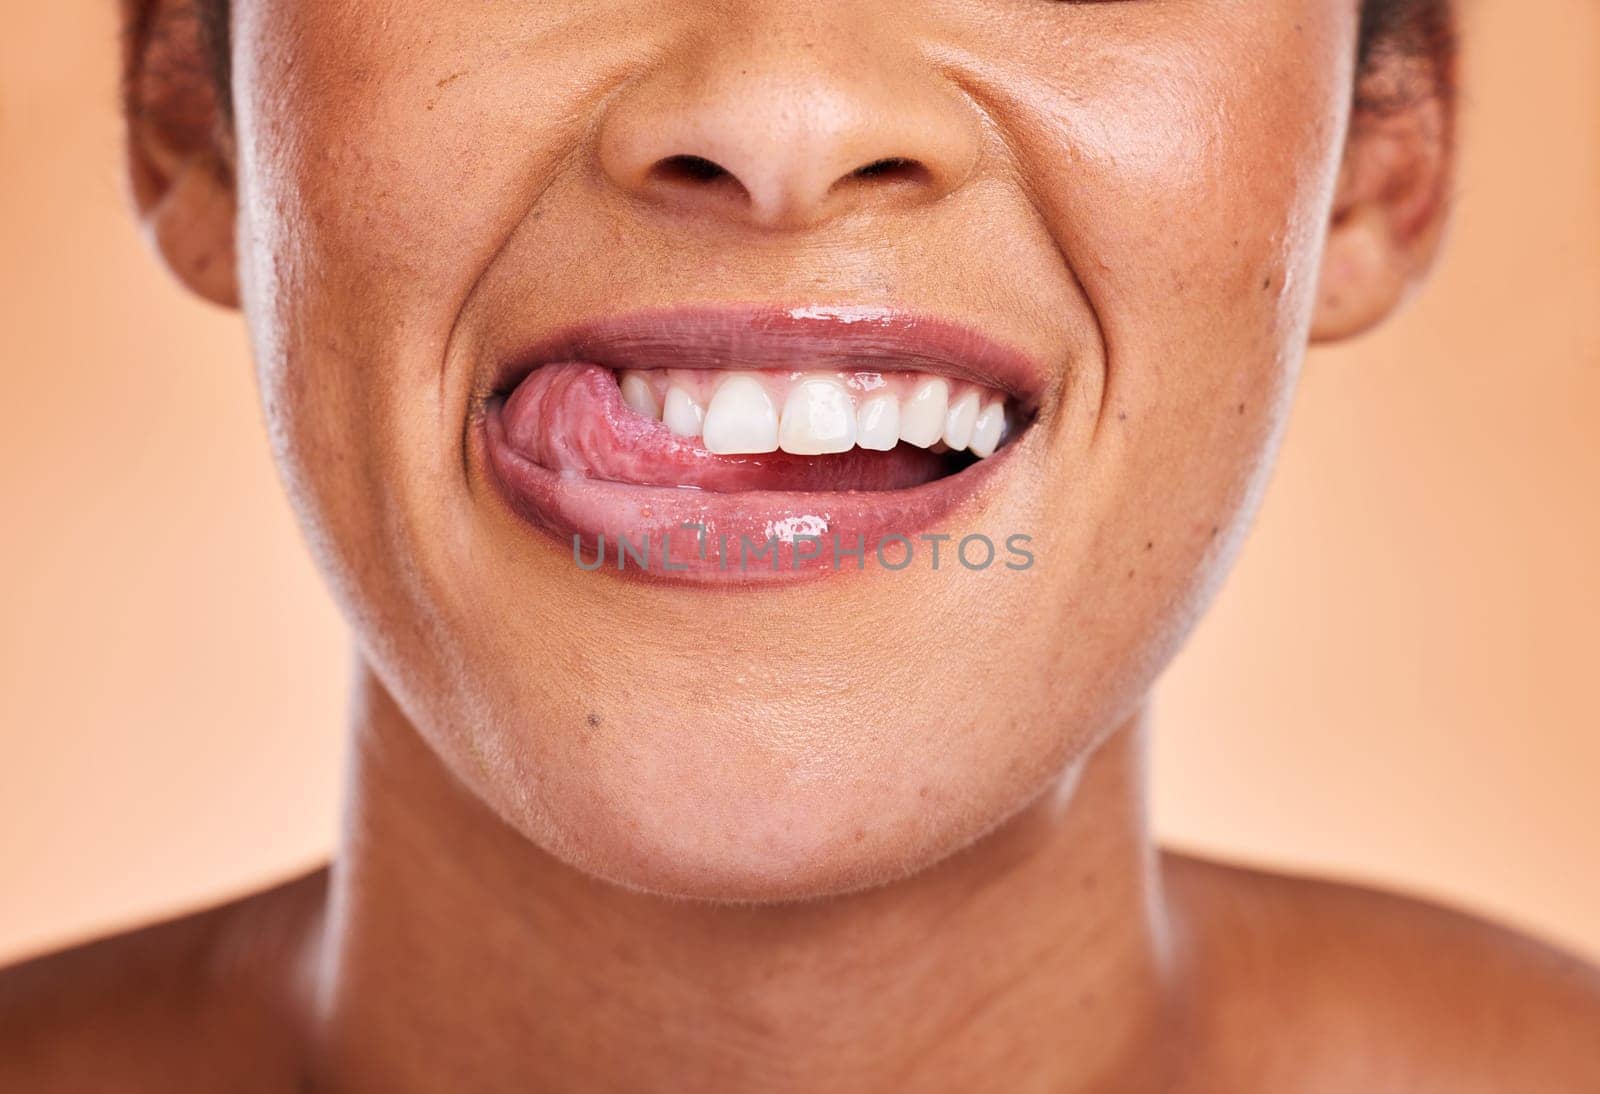 Woman, mouth and smile with teeth for dental care, cosmetics or surgery against a studio background. Female smiling in satisfaction for medical tooth, oral or gum care wellness and treatment.